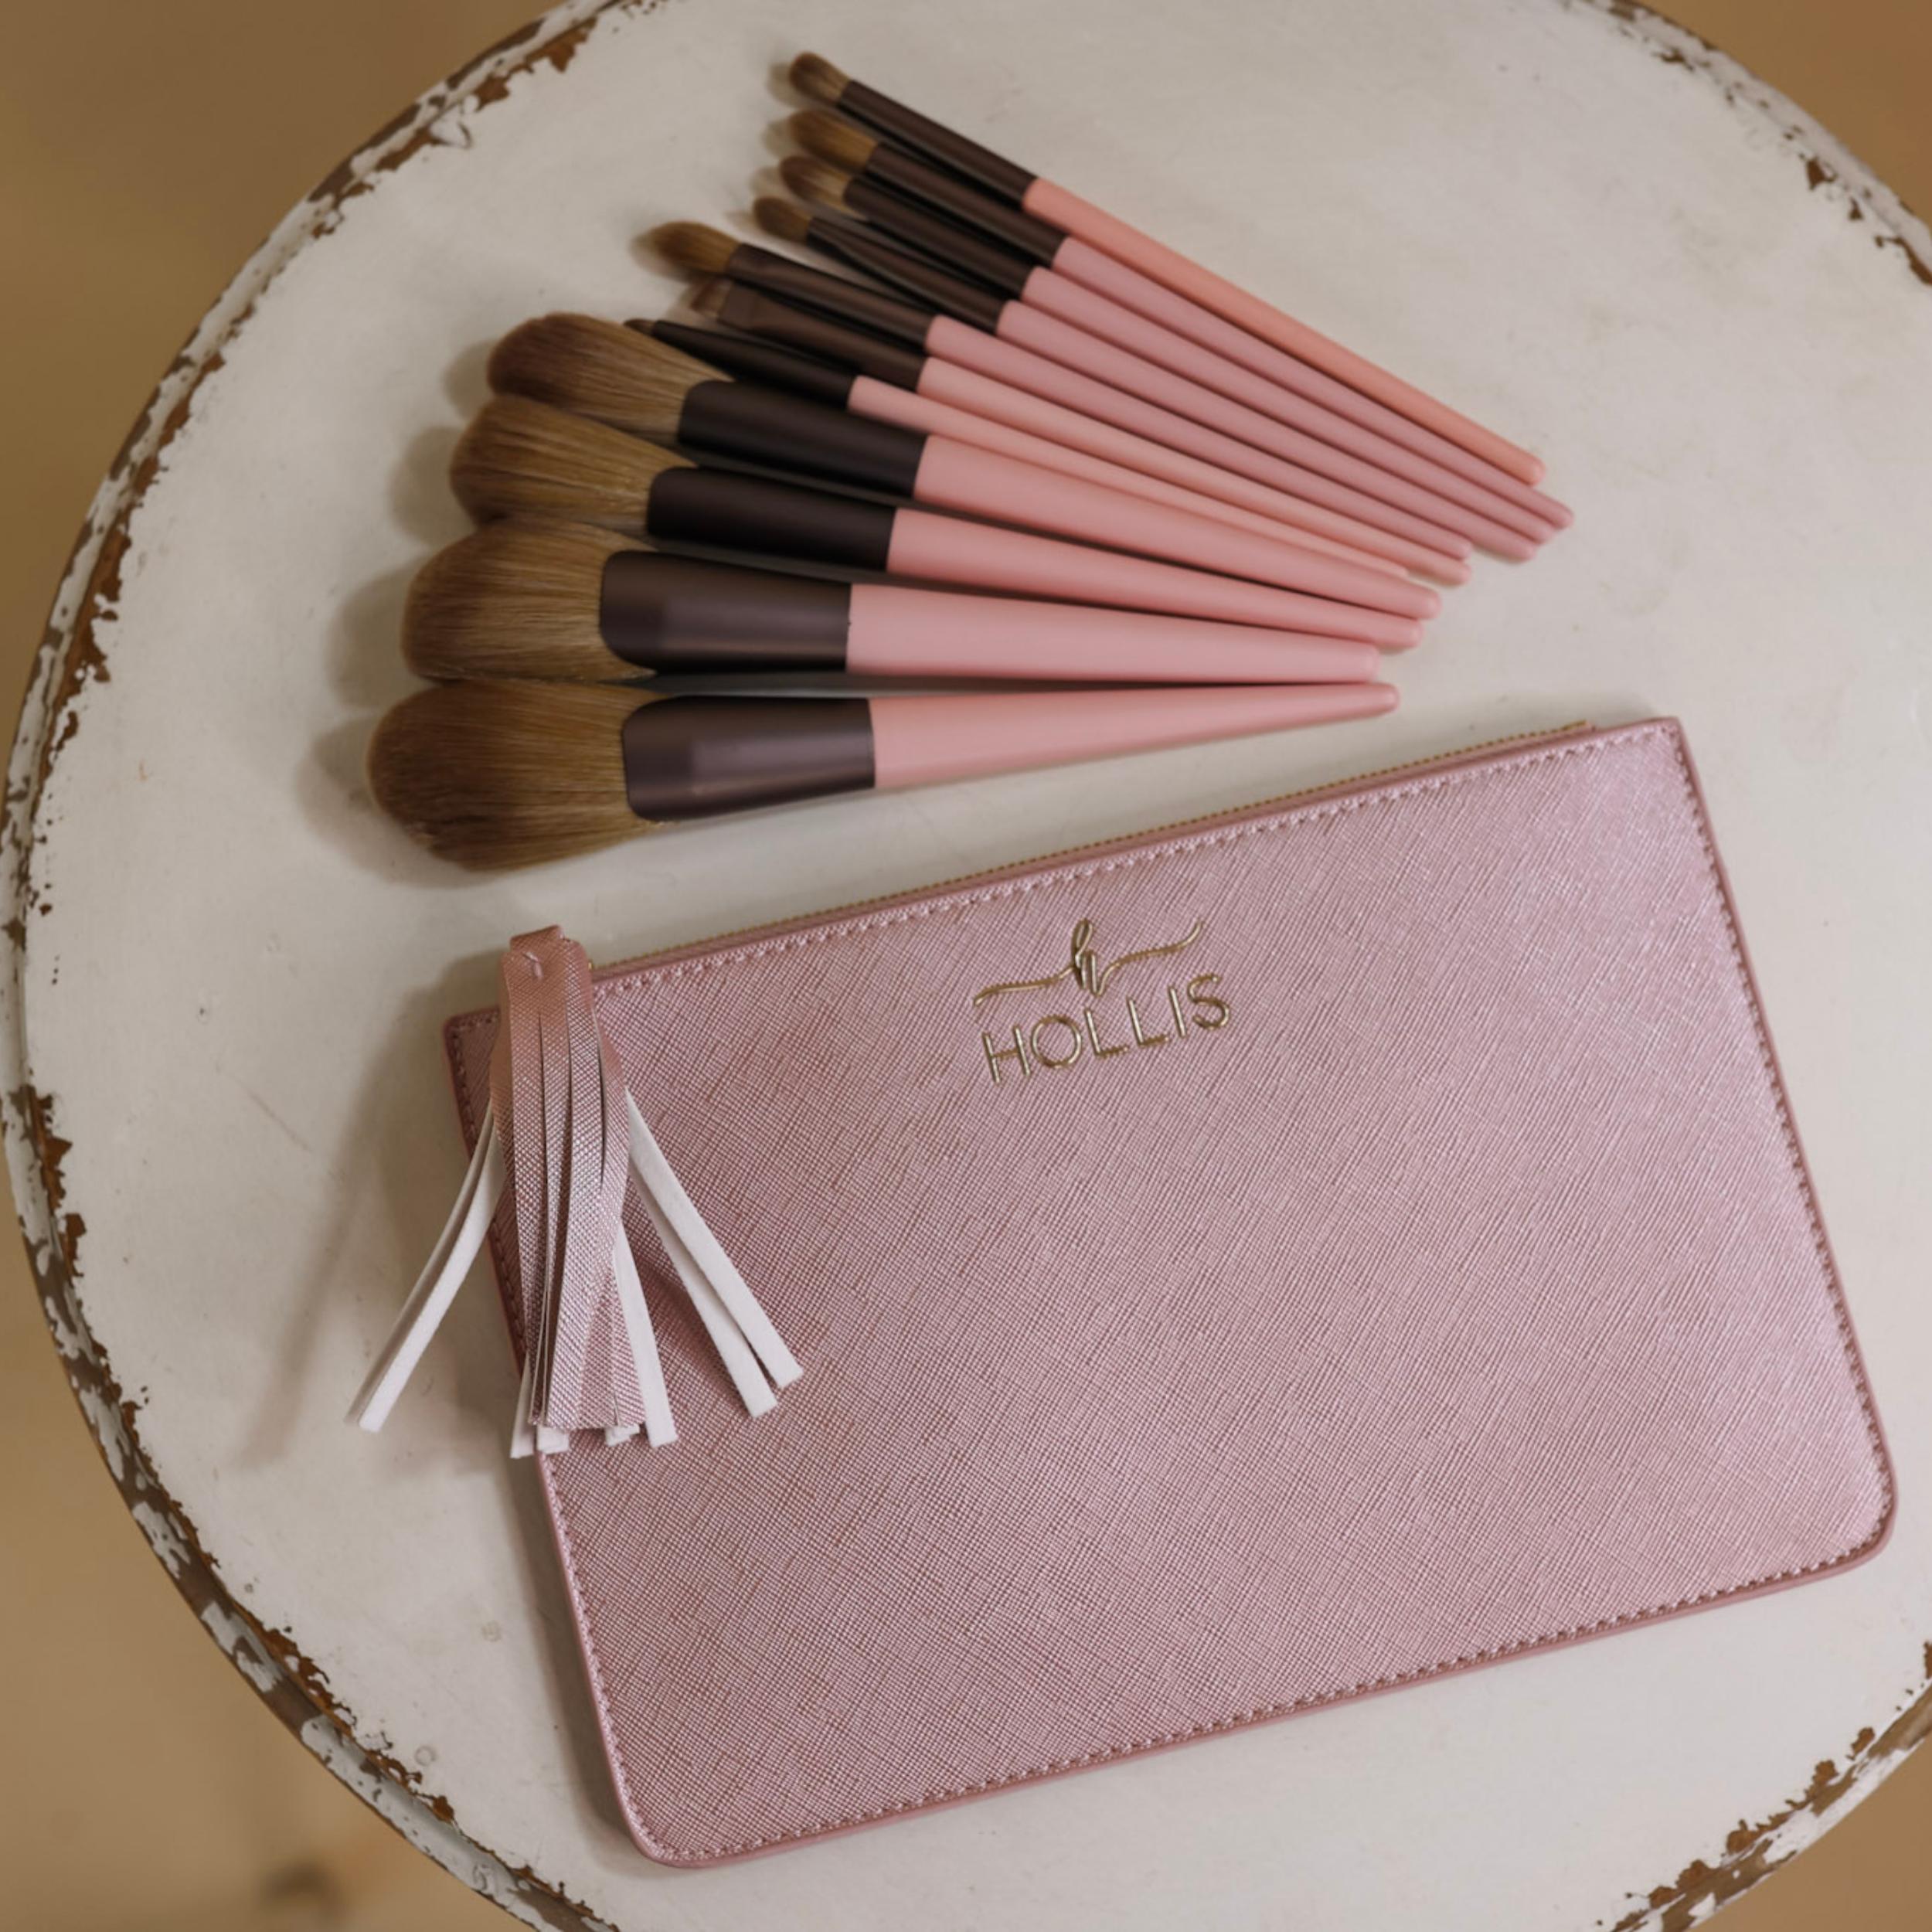 A blush pouch is laid in the bottom of the picture with 11 different sized makeup brushes across the top of the pouch in pink and brown. Background is white.  